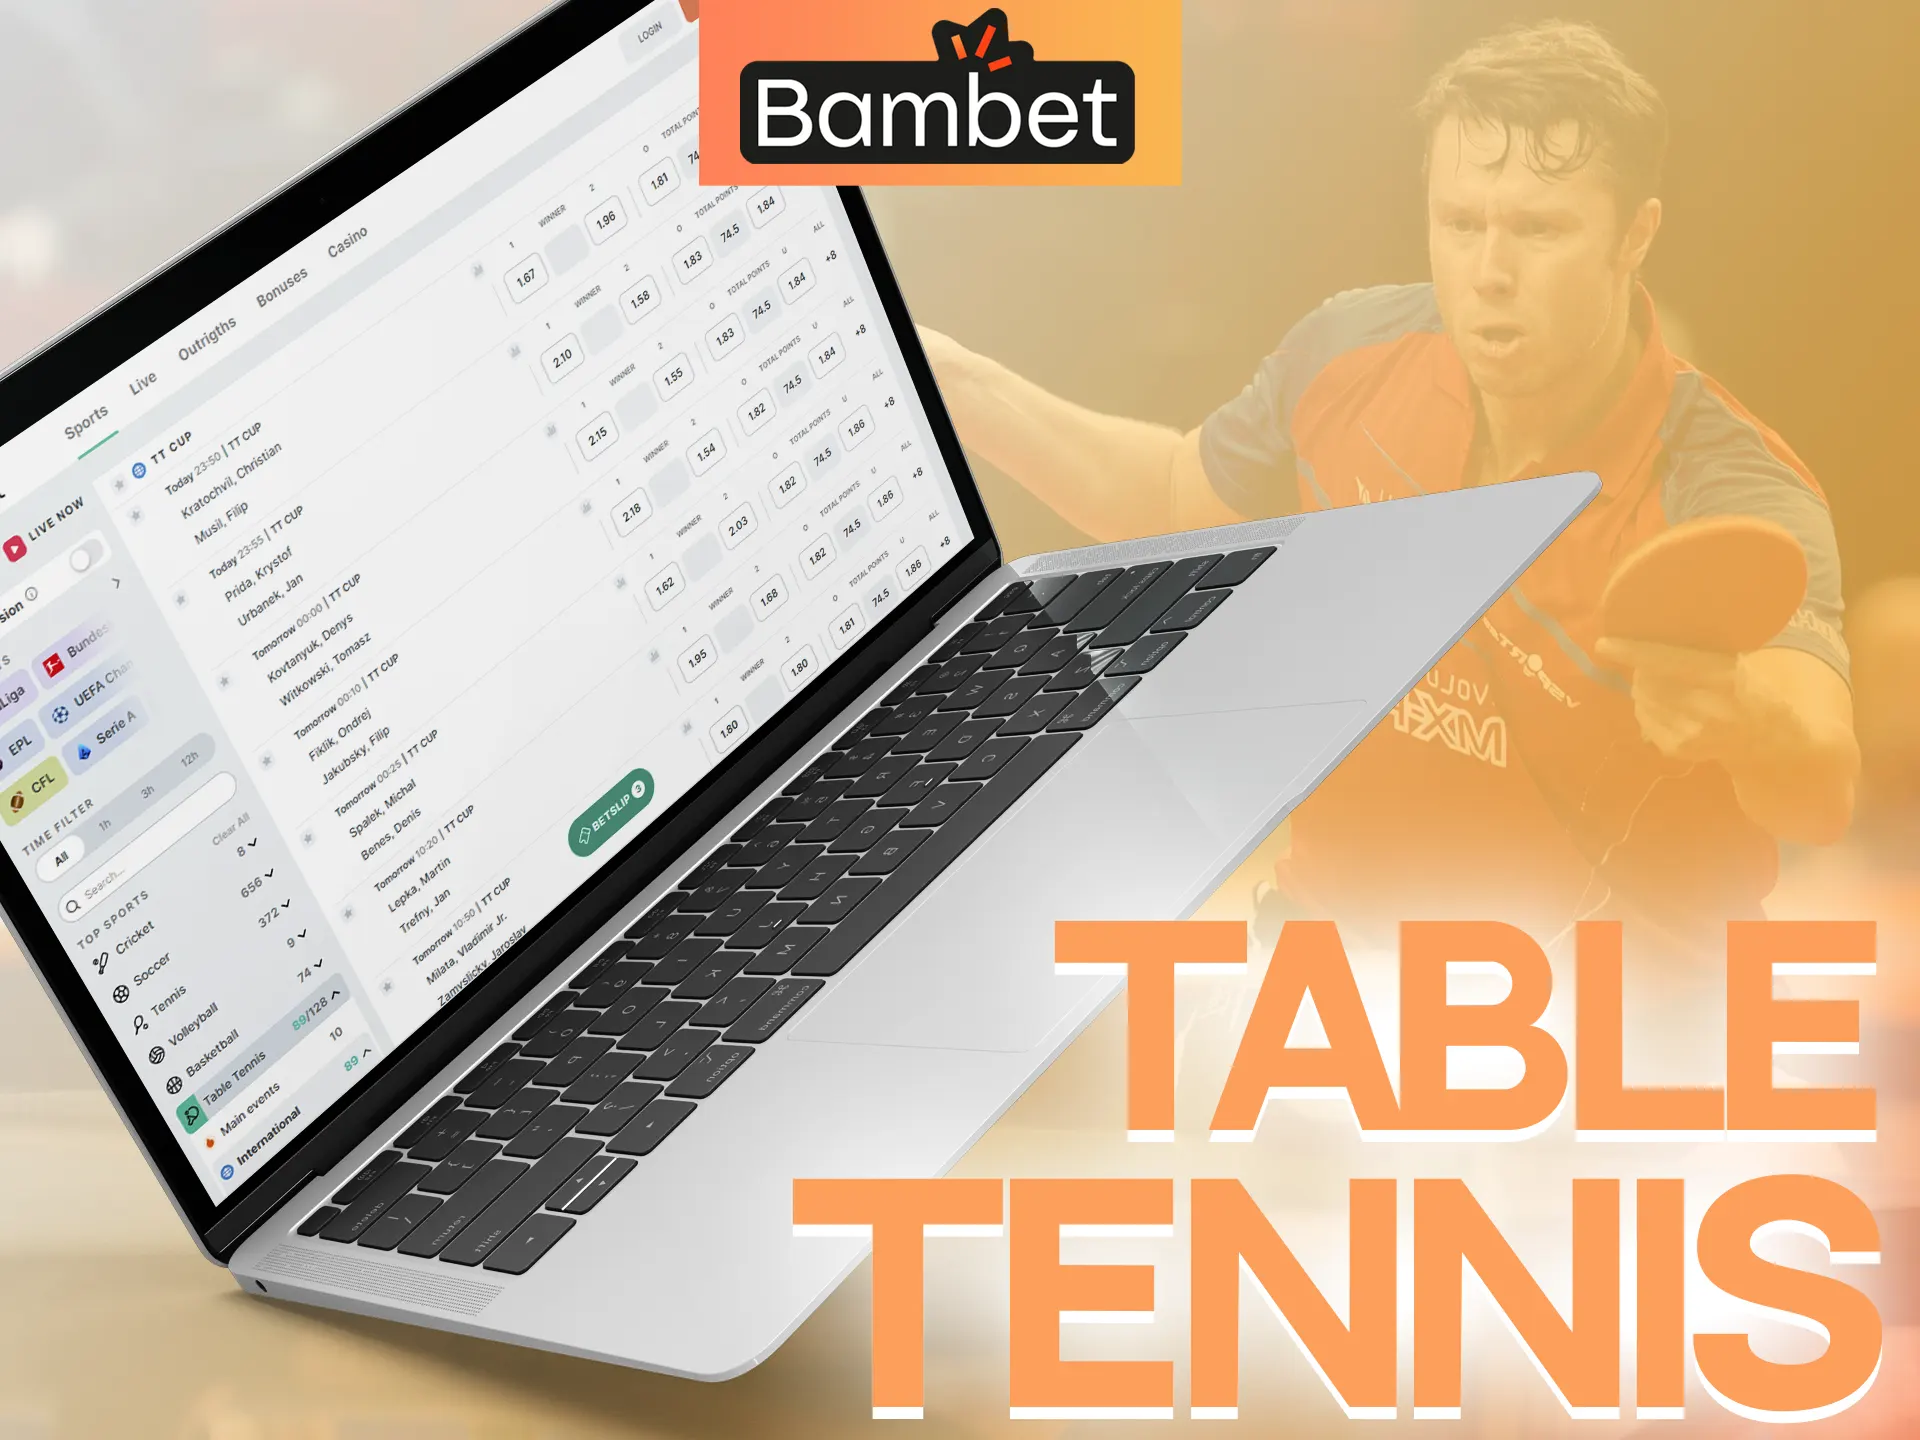 Bet on your favorite table tennis athletes with Bambet.